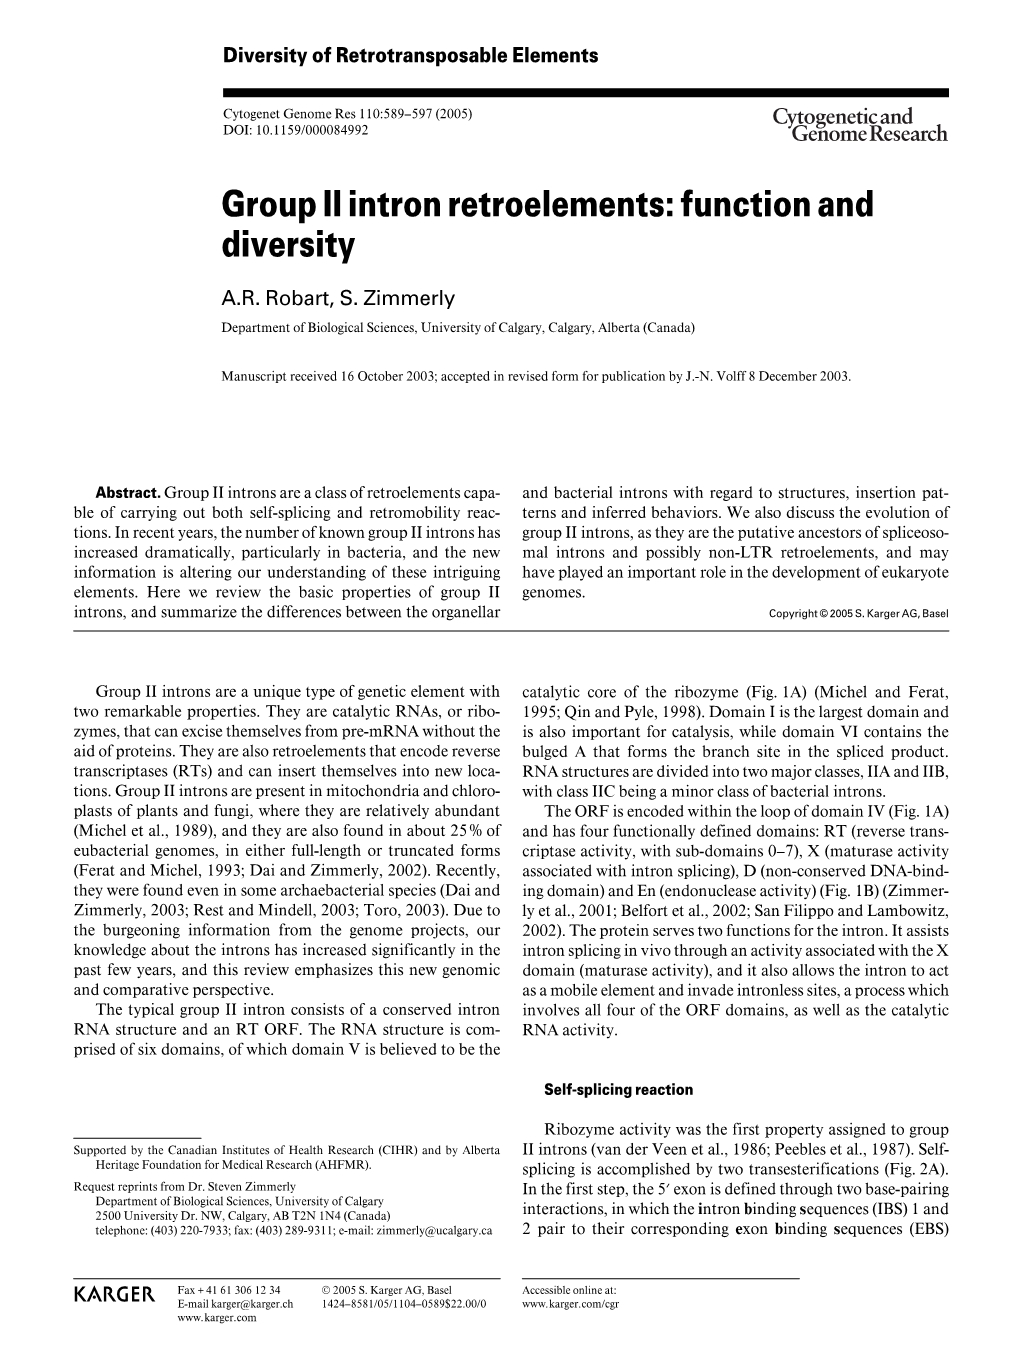 Group II Intron Retroelements: Function and Diversity